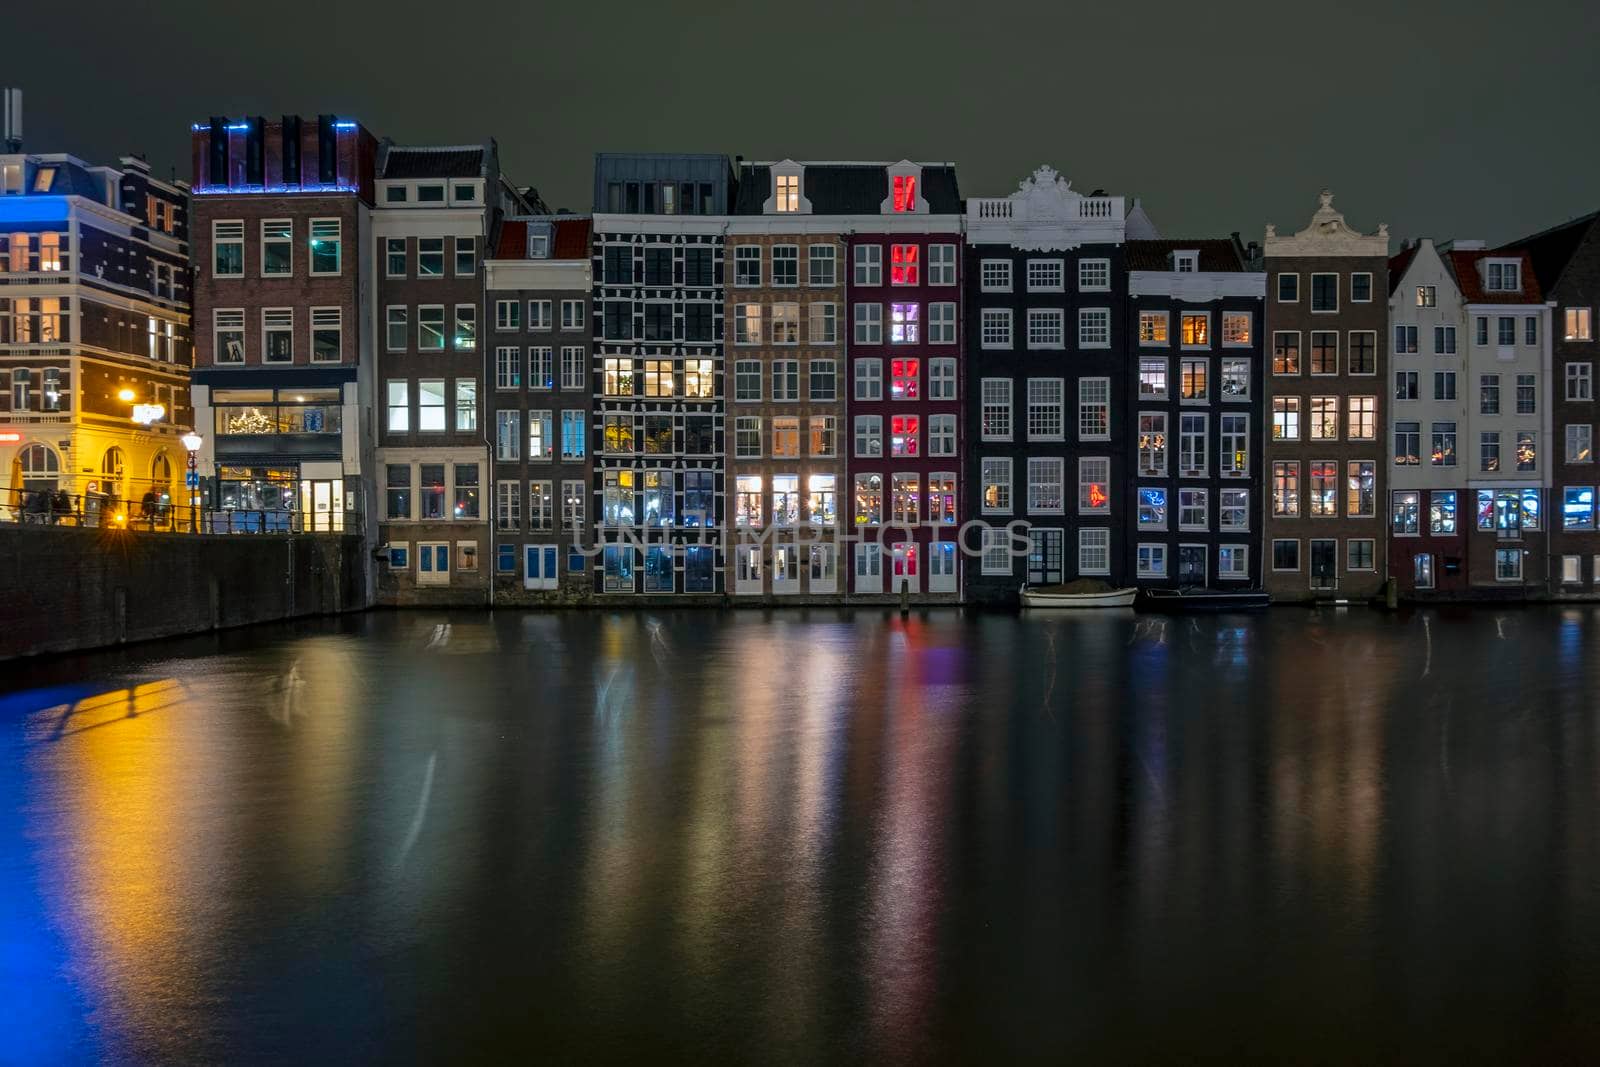 Traditonal houses at the Damrak in Amsterdam in the Netherlands by night by devy